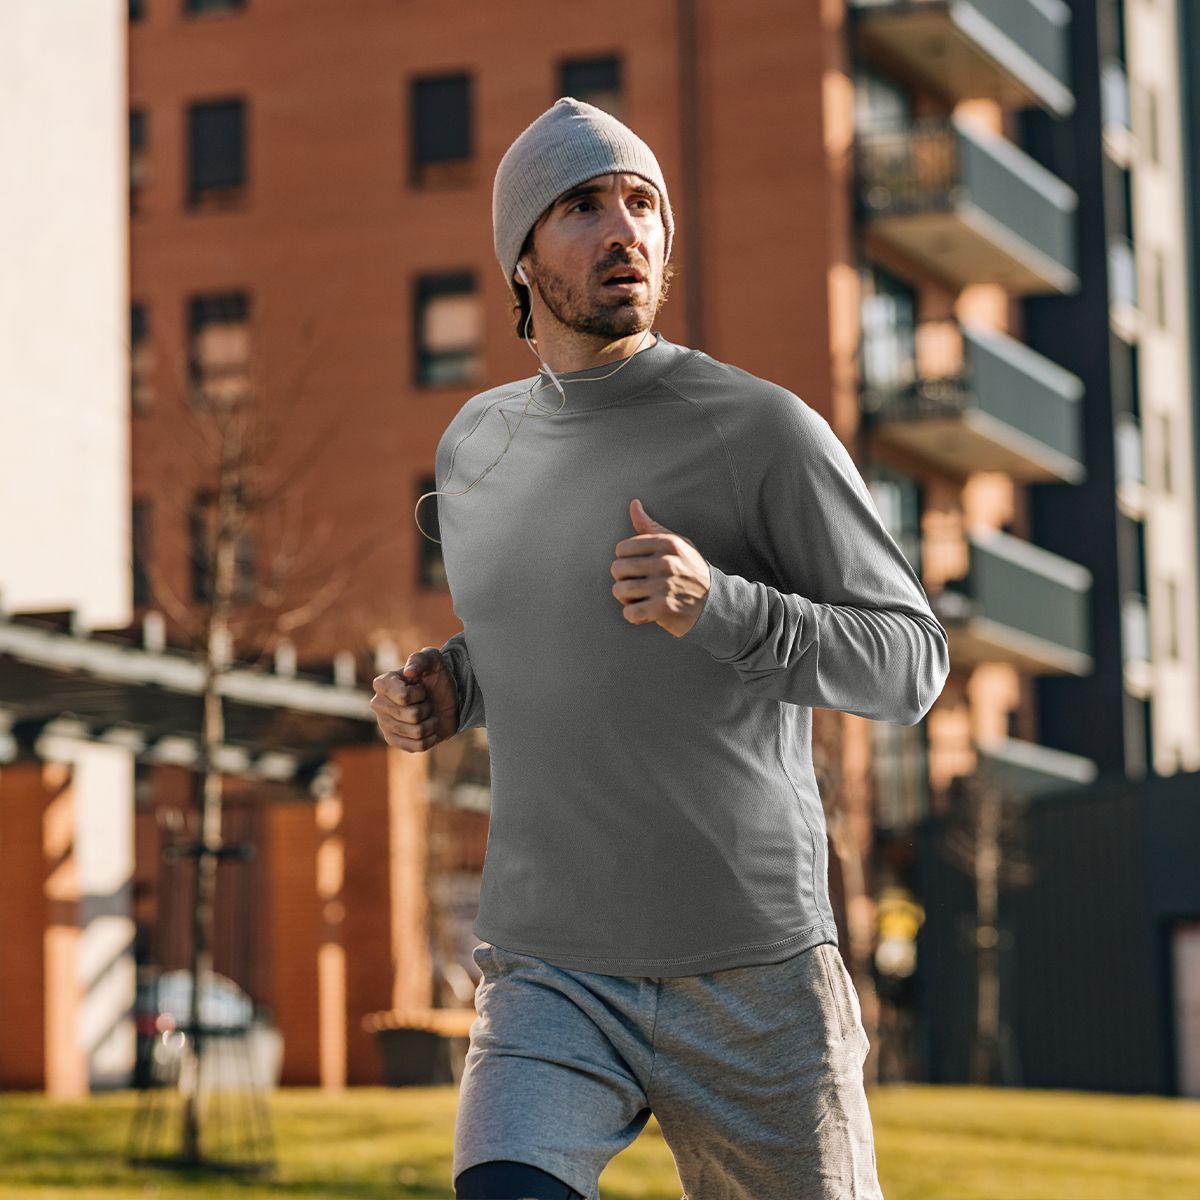 MIER's compression shirt - fits like a glove and keeps you warm. Perfect for warehouse nights or outdoor adventures. Lightweight, stylish, and comfy. Get yours today! Click the link in our bio. #engineeredformotion #turtleneck #layertop #layering #baselayer #trailrunning